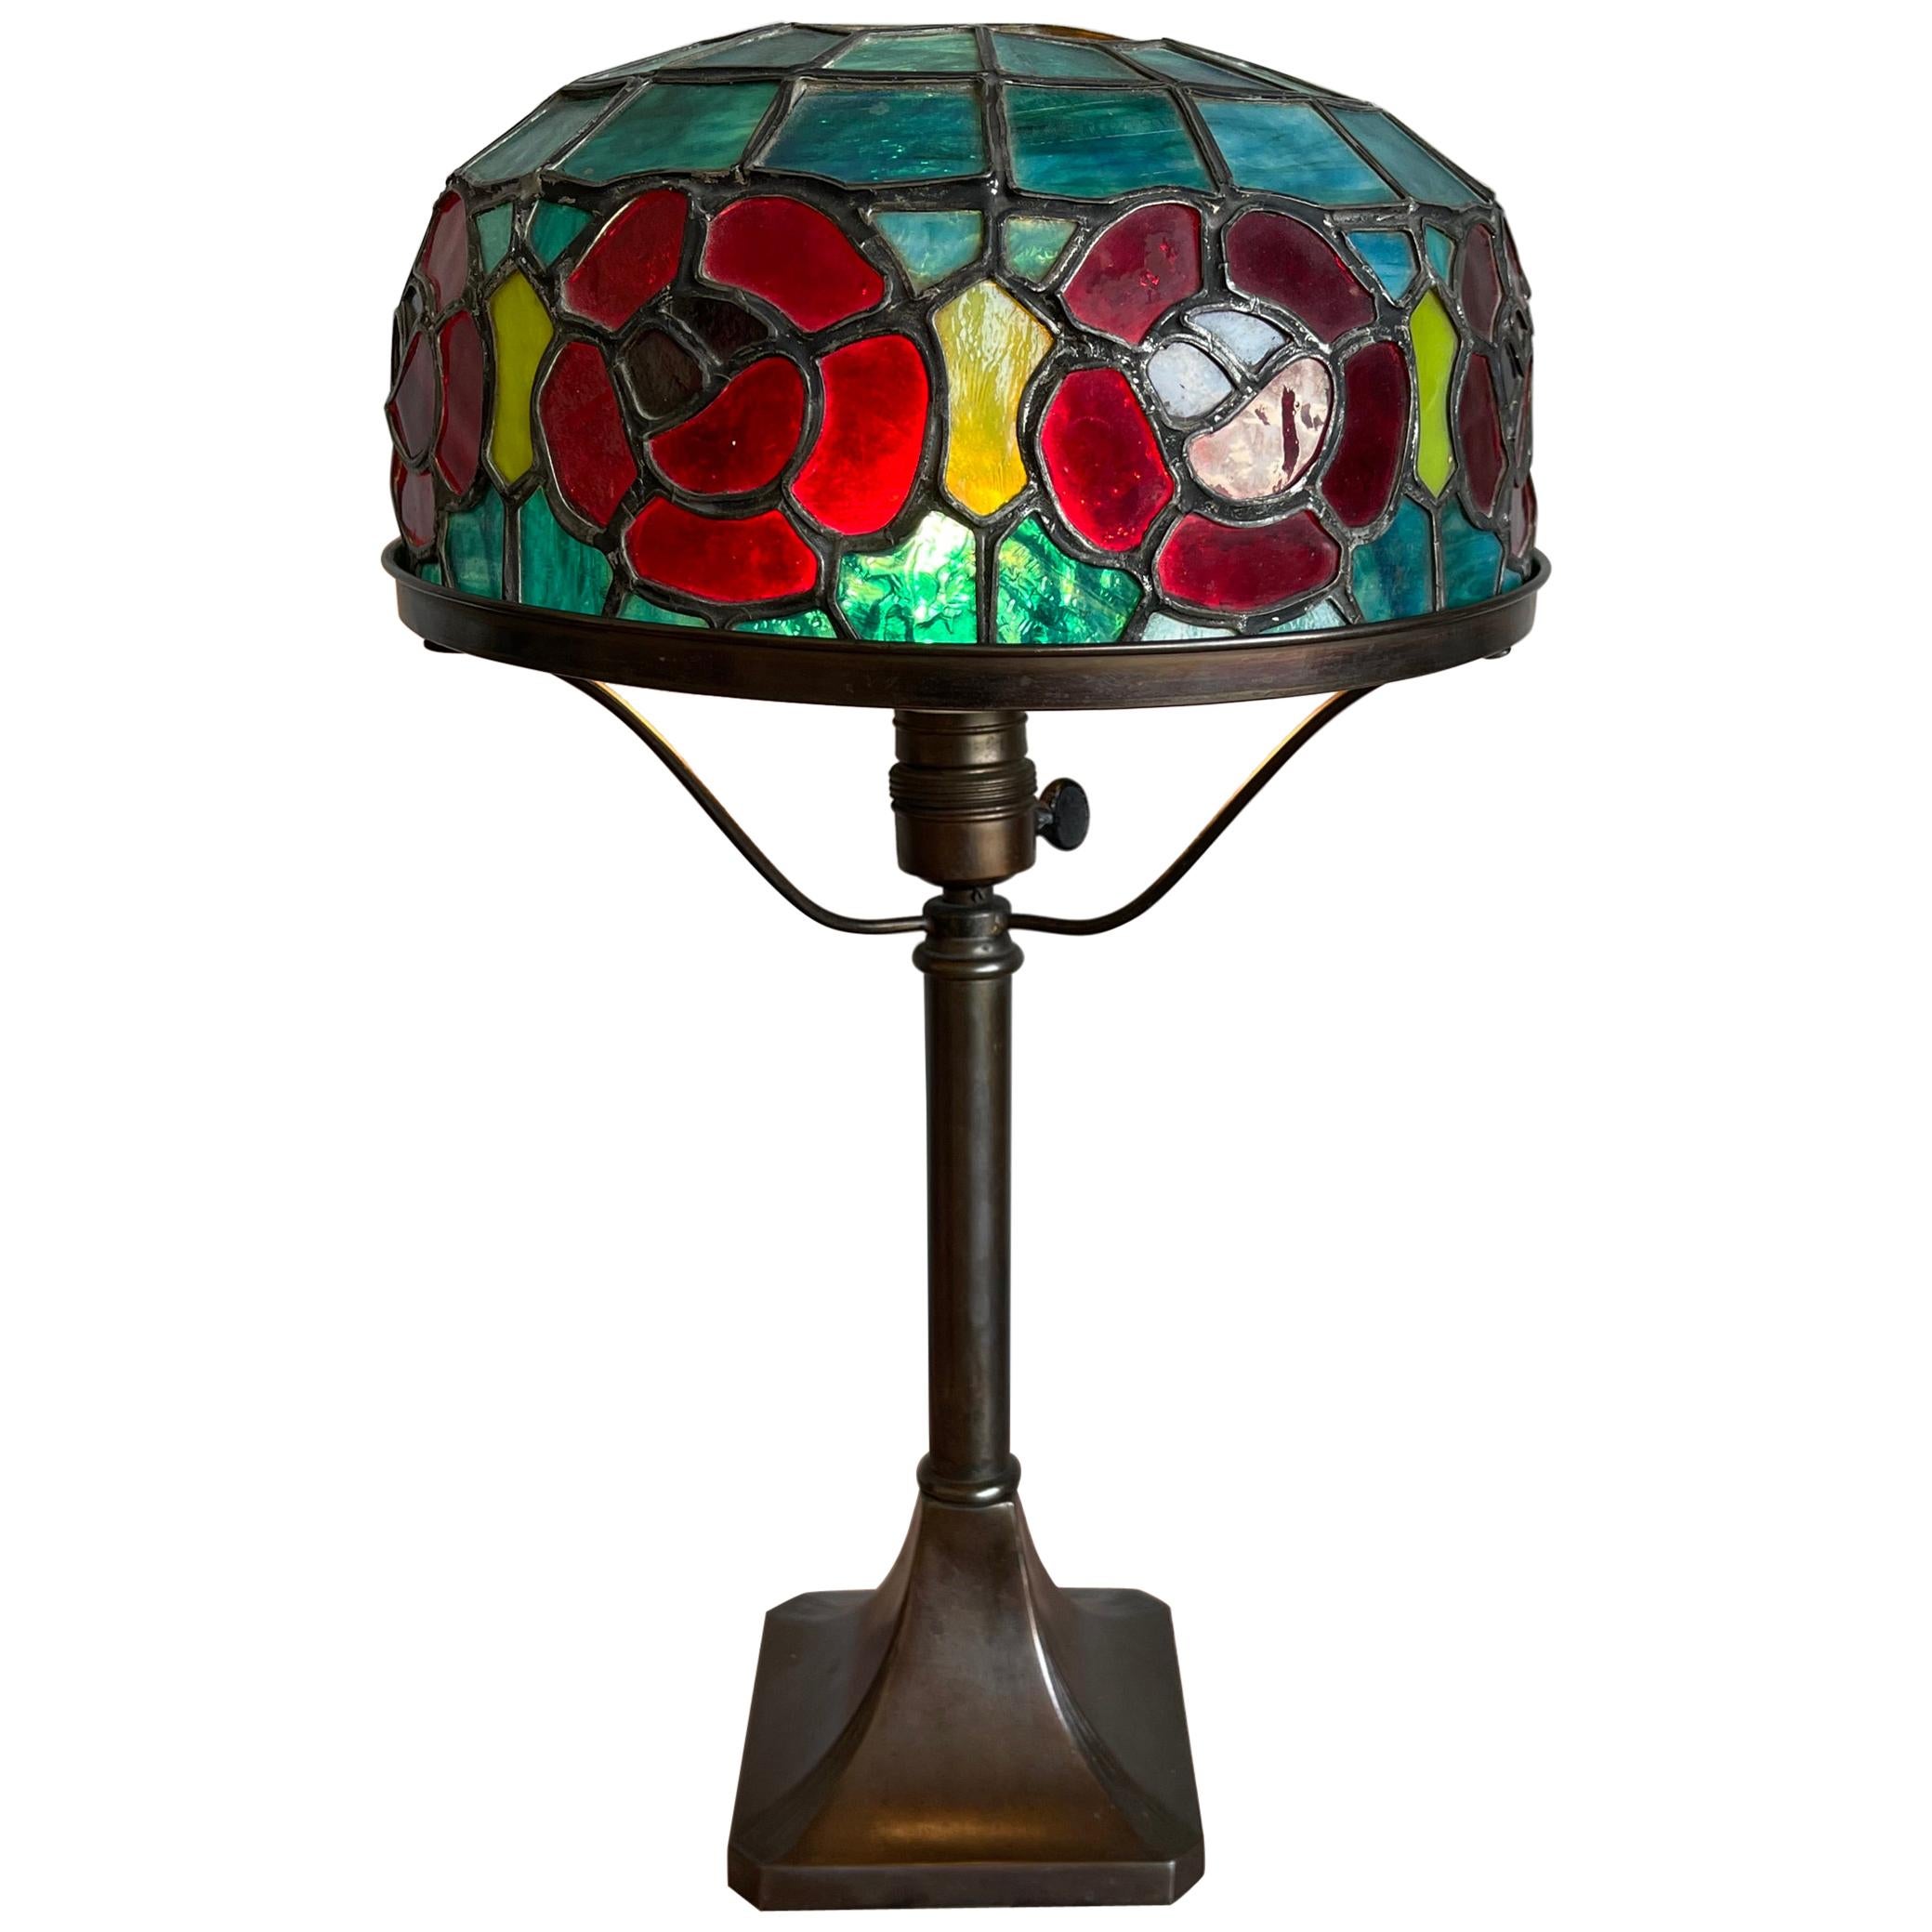 Wonderful Stain Leaded Art Deco Glass Table Lamp Geometric Design & Great Colors